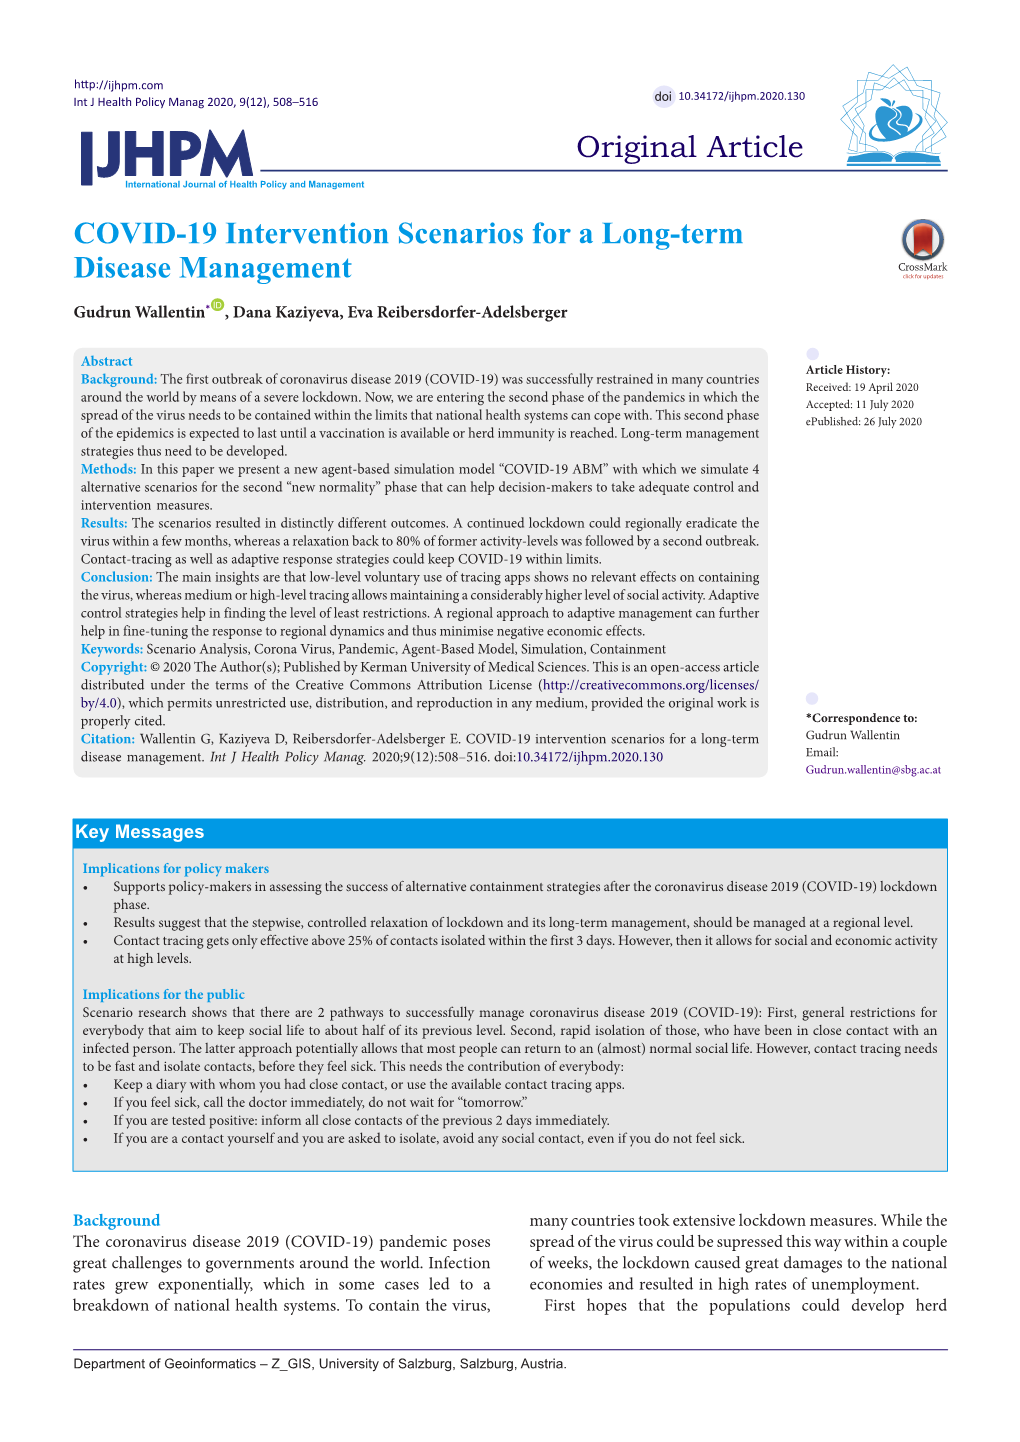 COVID-19 Intervention Scenarios for a Long-Term Disease Management